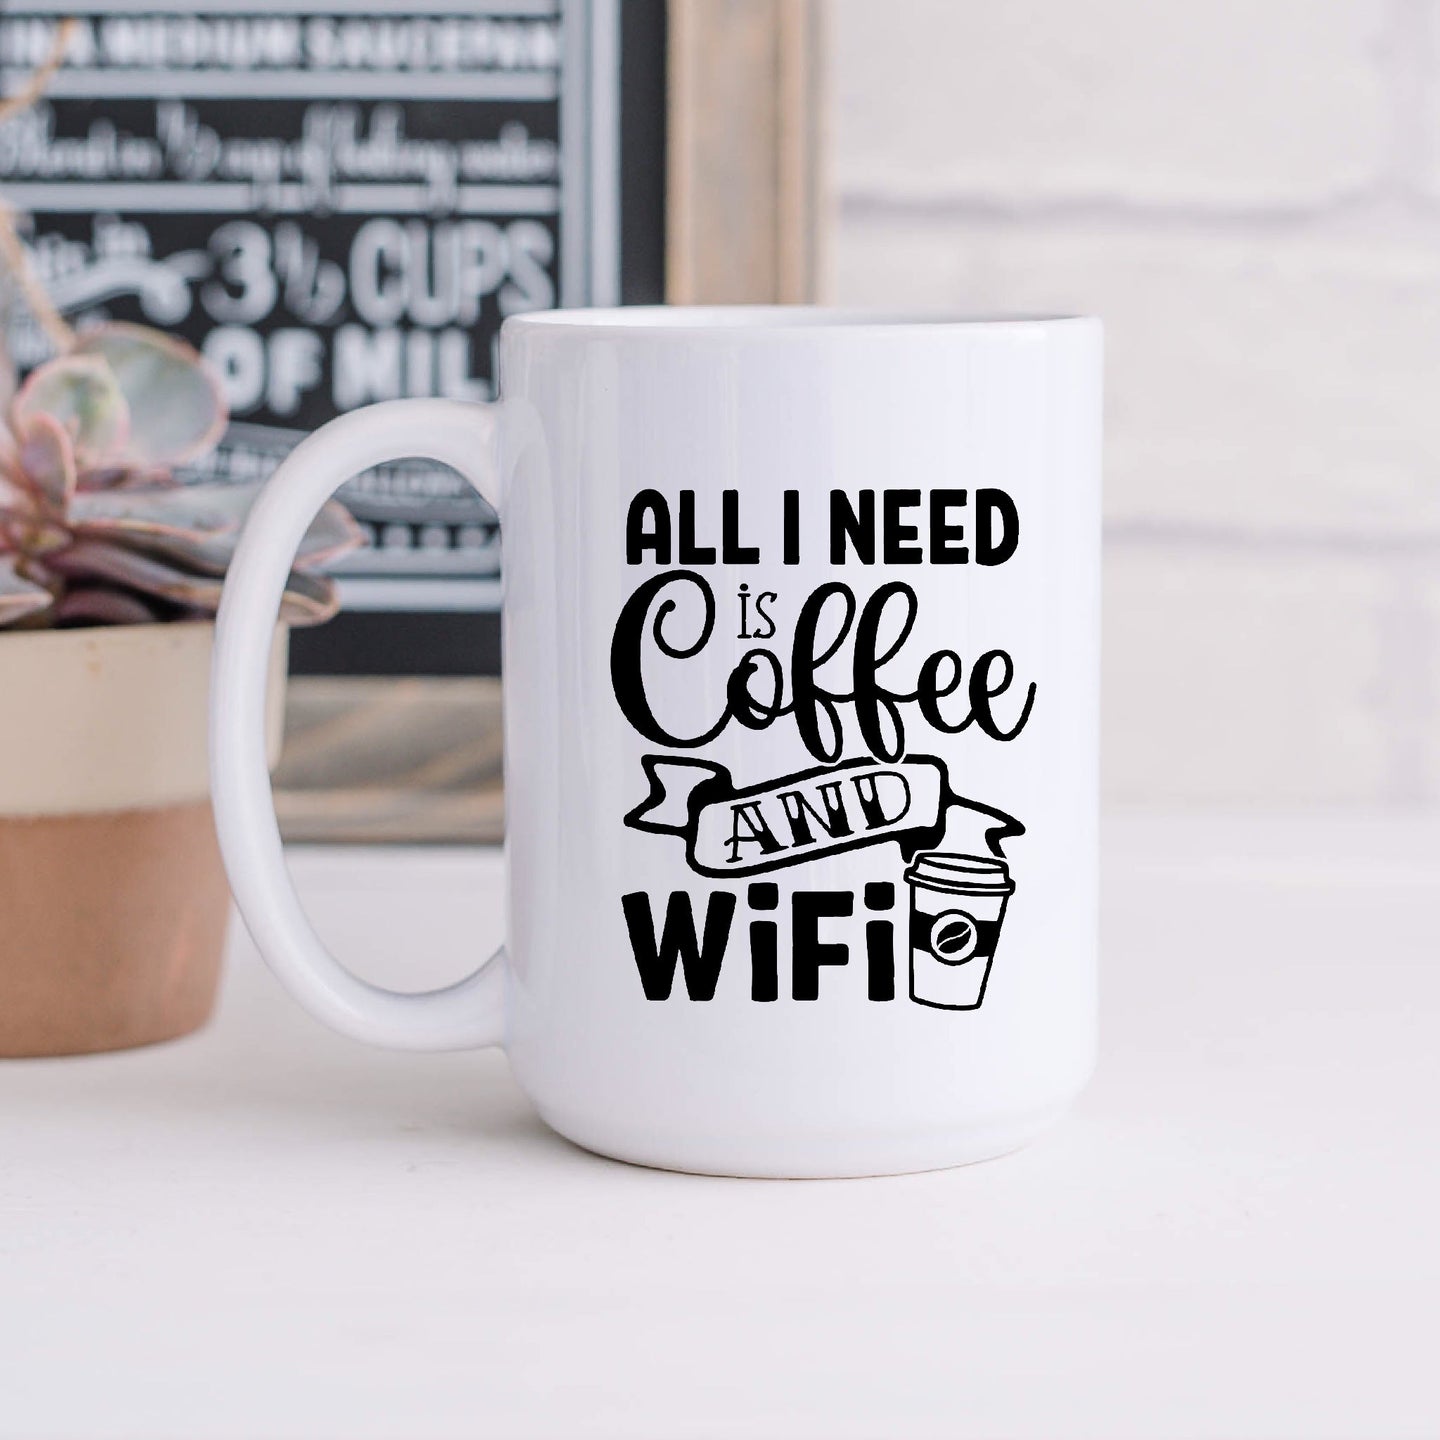 All I Need is Coffee and Wifi